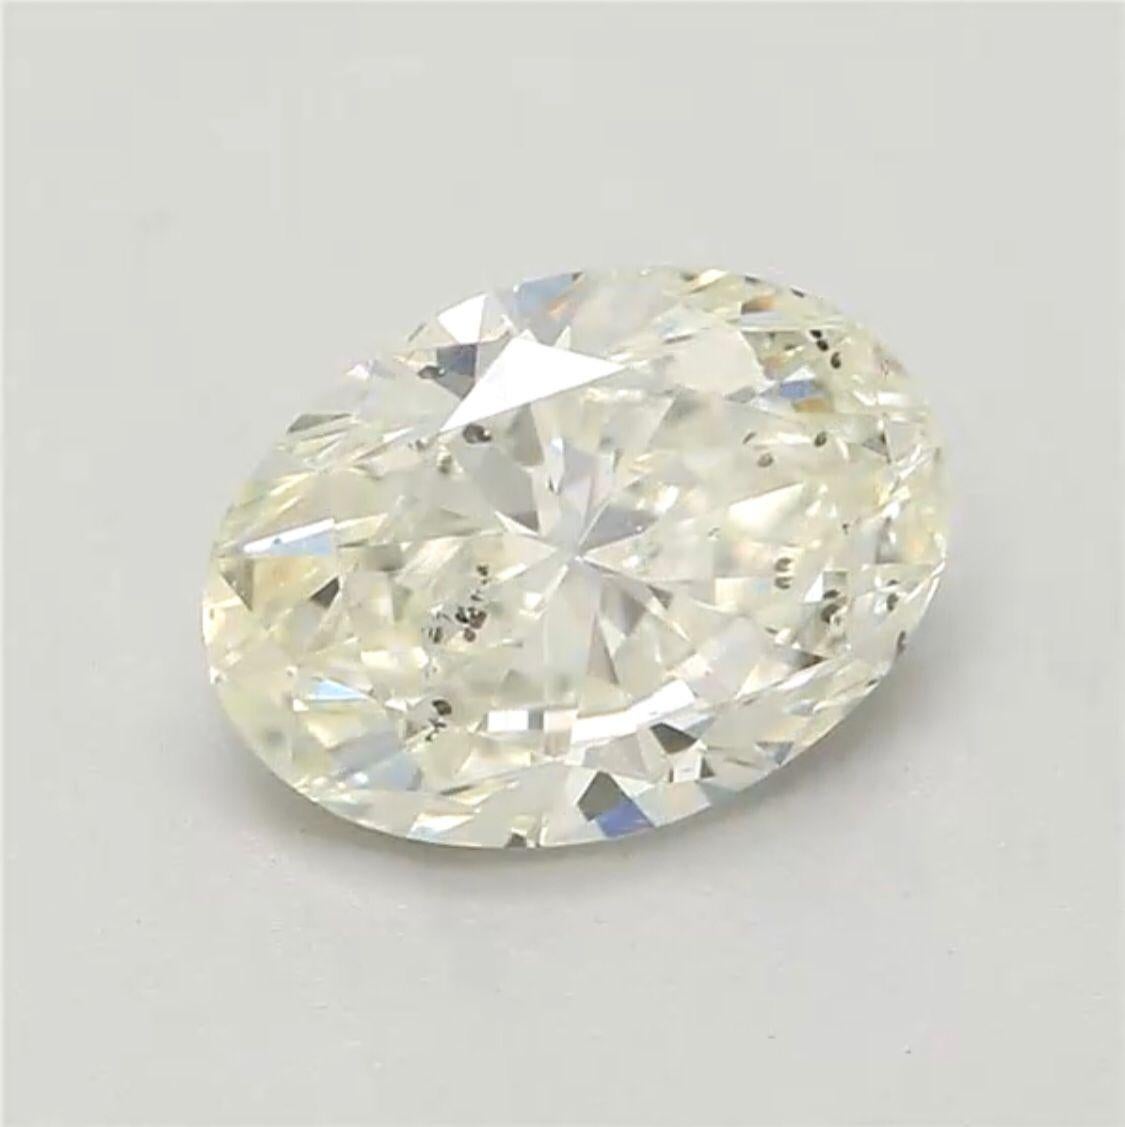 *100% NATURAL FANCY COLOUR DIAMOND*

✪ Diamond Details ✪

➛ Shape: Oval
➛ Colour Grade: Very Light Yellow-Green
➛ Carat: 0.81
➛ Clarity: SI2
➛ GIA Certified 

^FEATURES OF THE DIAMOND^

This 0.81 carat diamond has a diameter of around 6mm. Our very